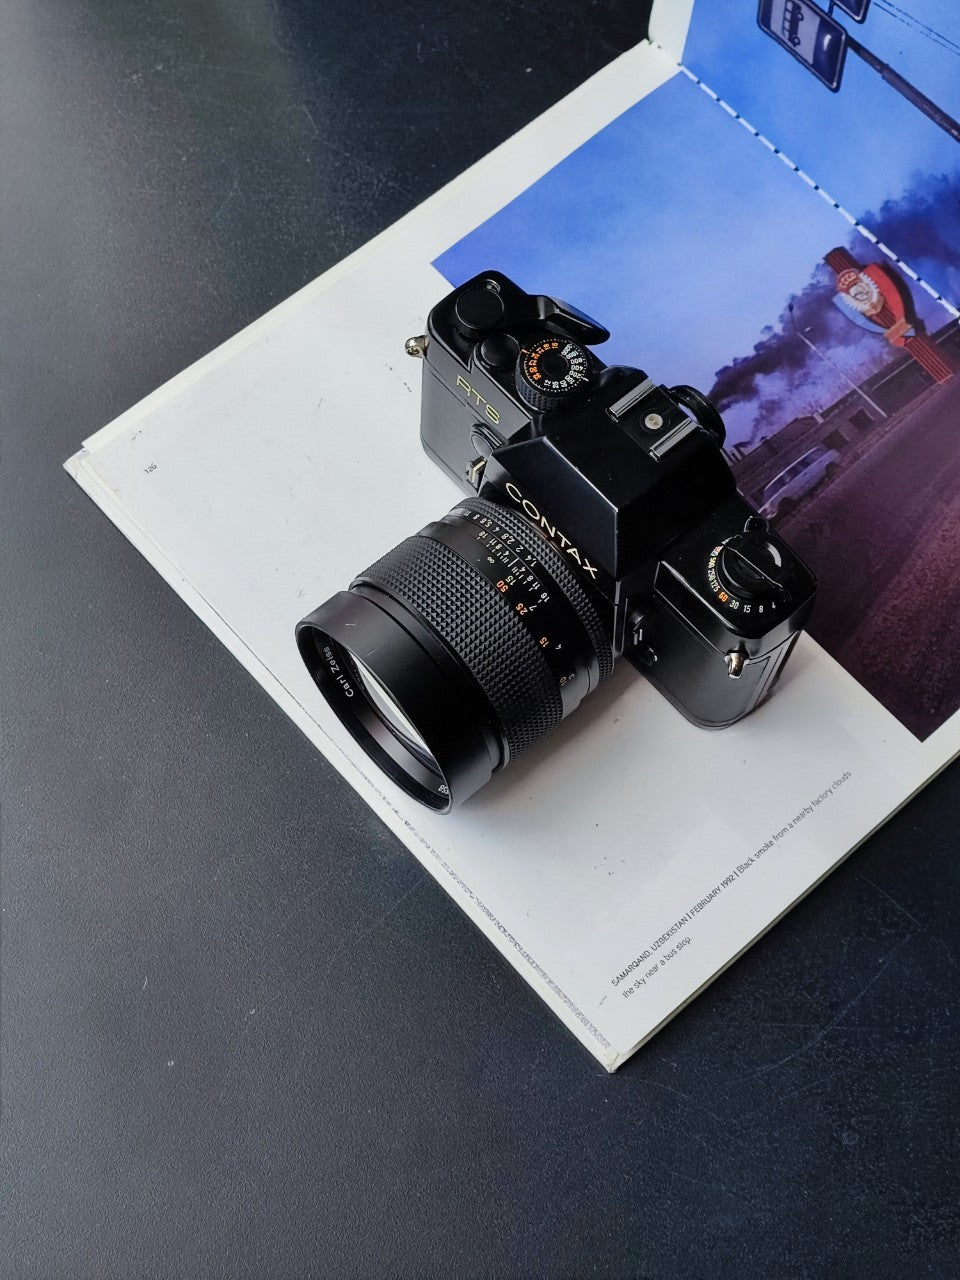 Contax RTS with Carl Zeiss Planar 85mm F1.4 T*